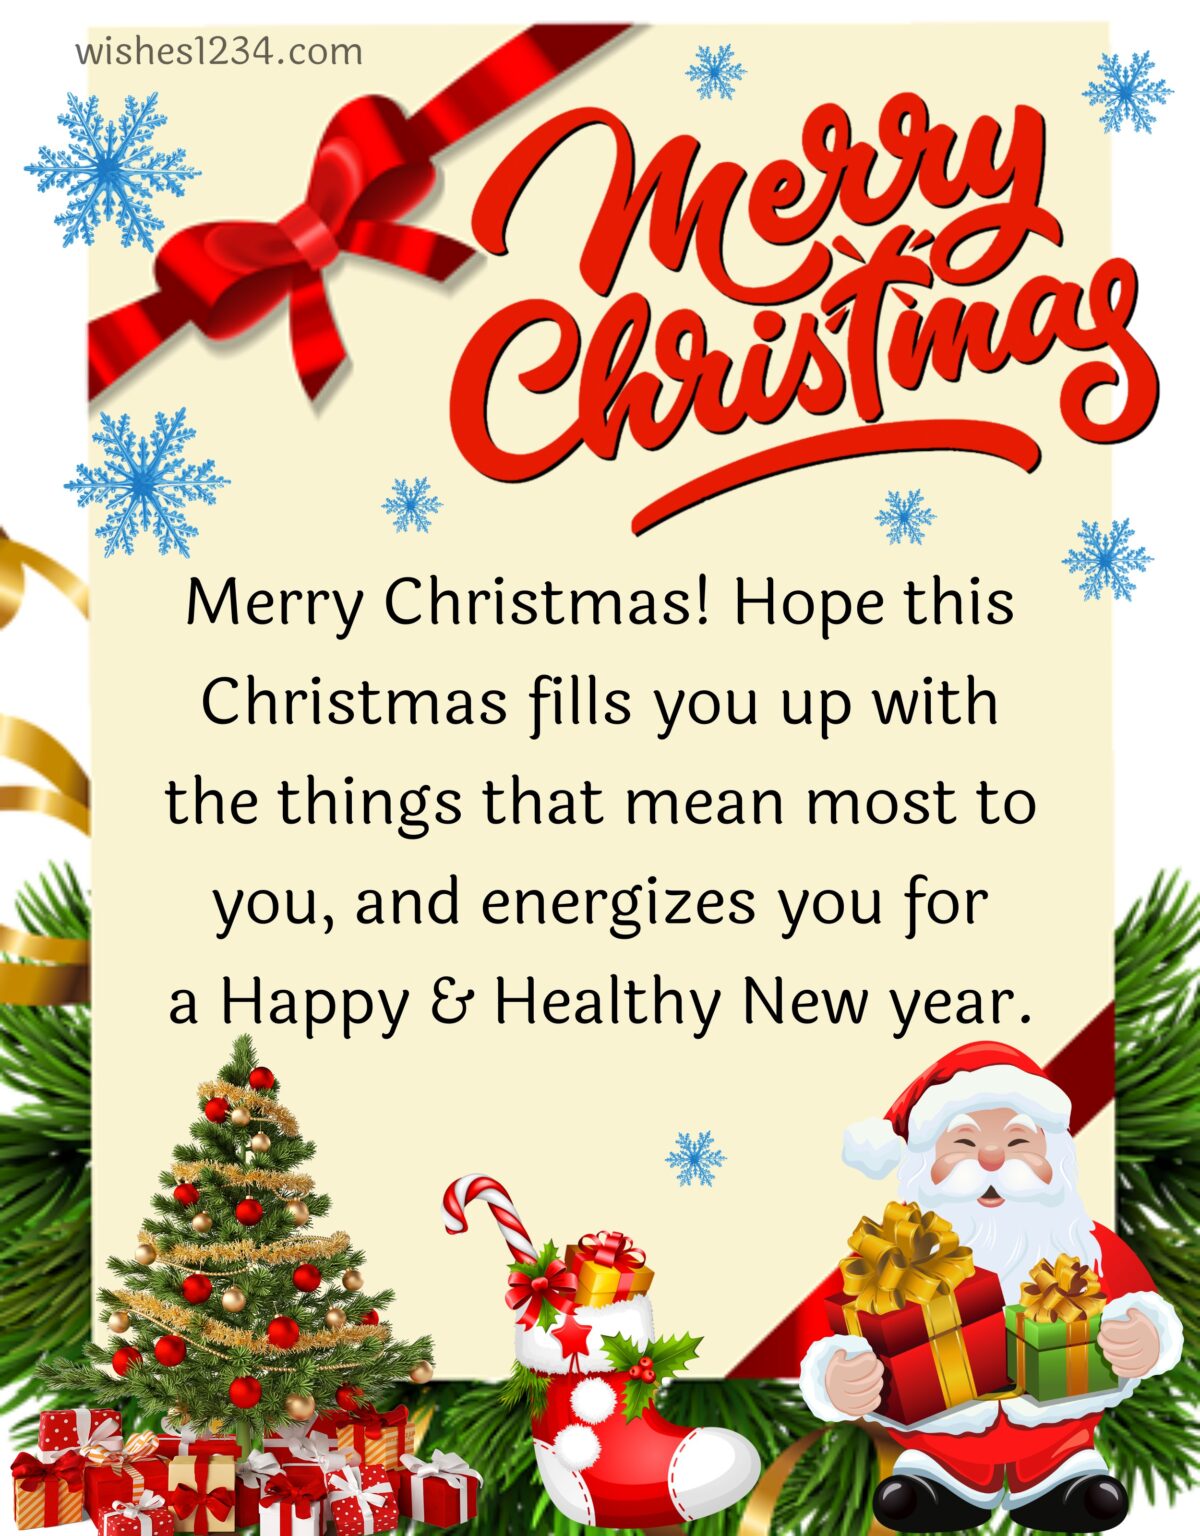 100+ Merry Christmas wishes with beautiful images